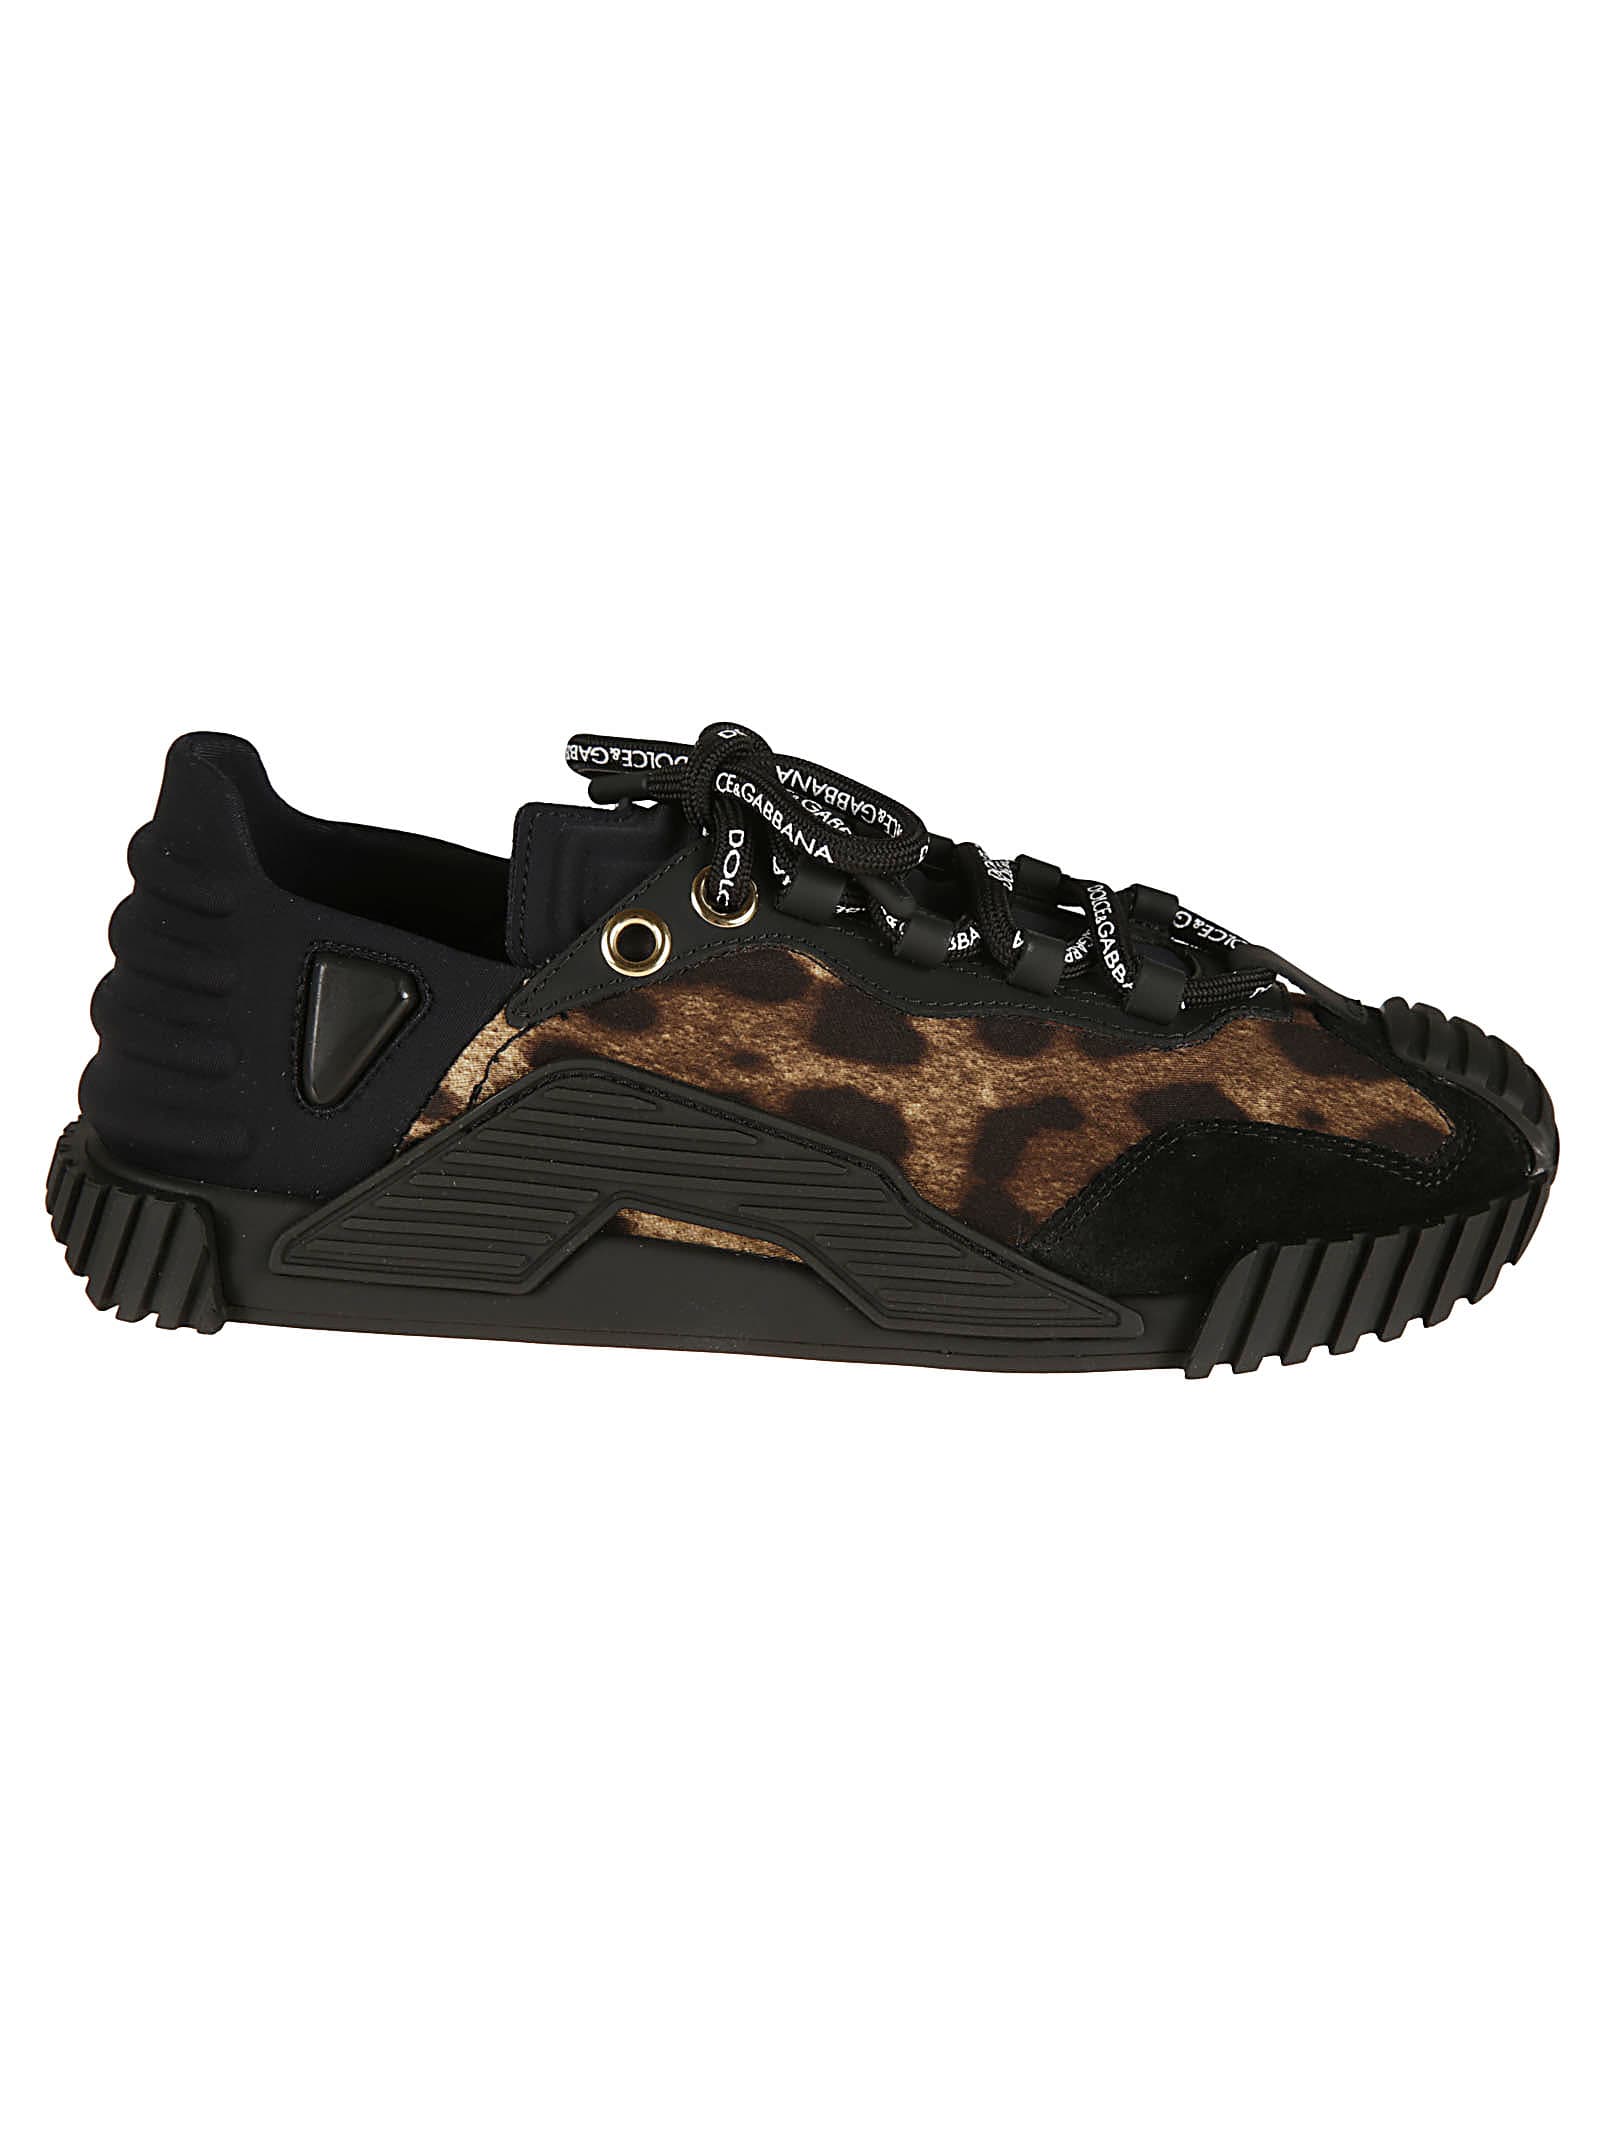 Buy Dolce & Gabbana Animalier Print Sneakers online, shop Dolce & Gabbana shoes with free shipping